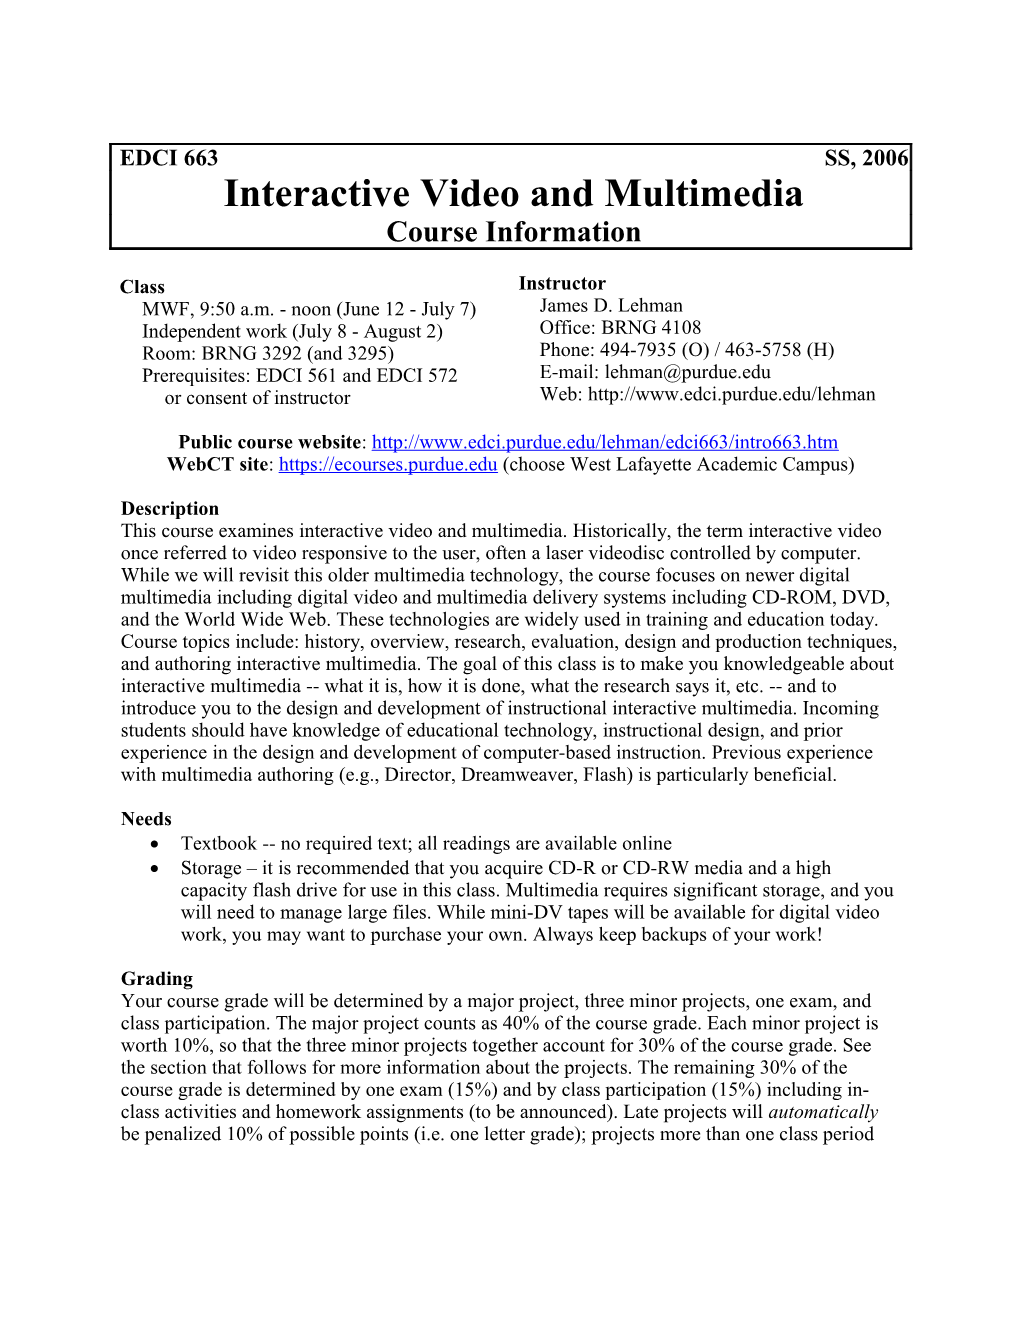 Fall 2003EDCI 663, Interactive Video and Multimedia 1